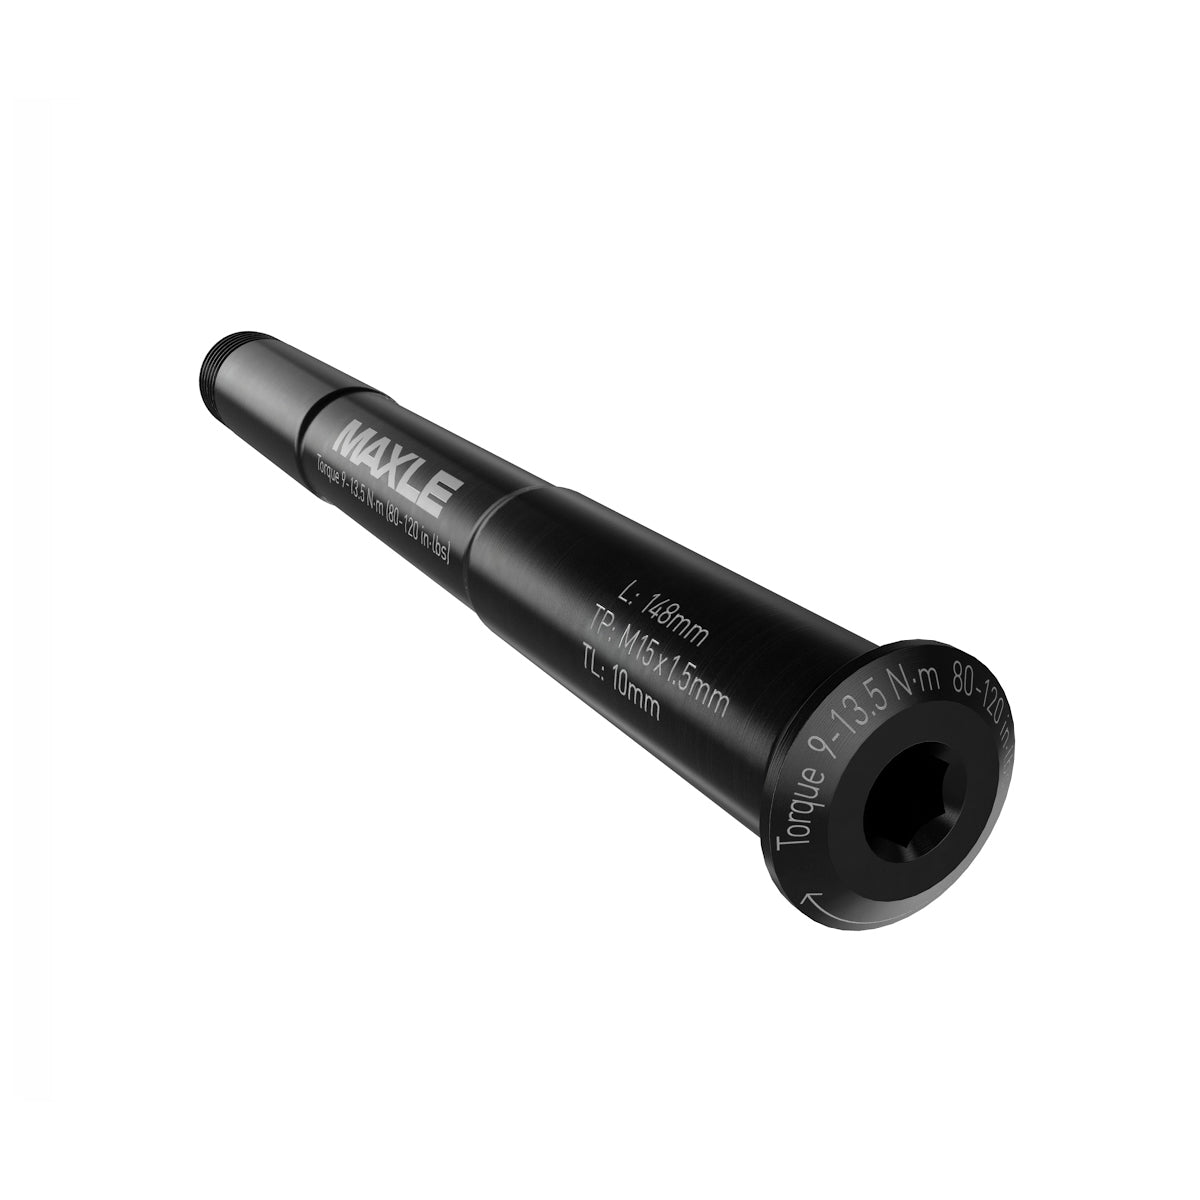 Rock Shox Maxle Stealth Front Mtb - 15x110 - Length 158mm - Thread Length 9mm - Thread Pitch M15x1.50 - Boost Compatible